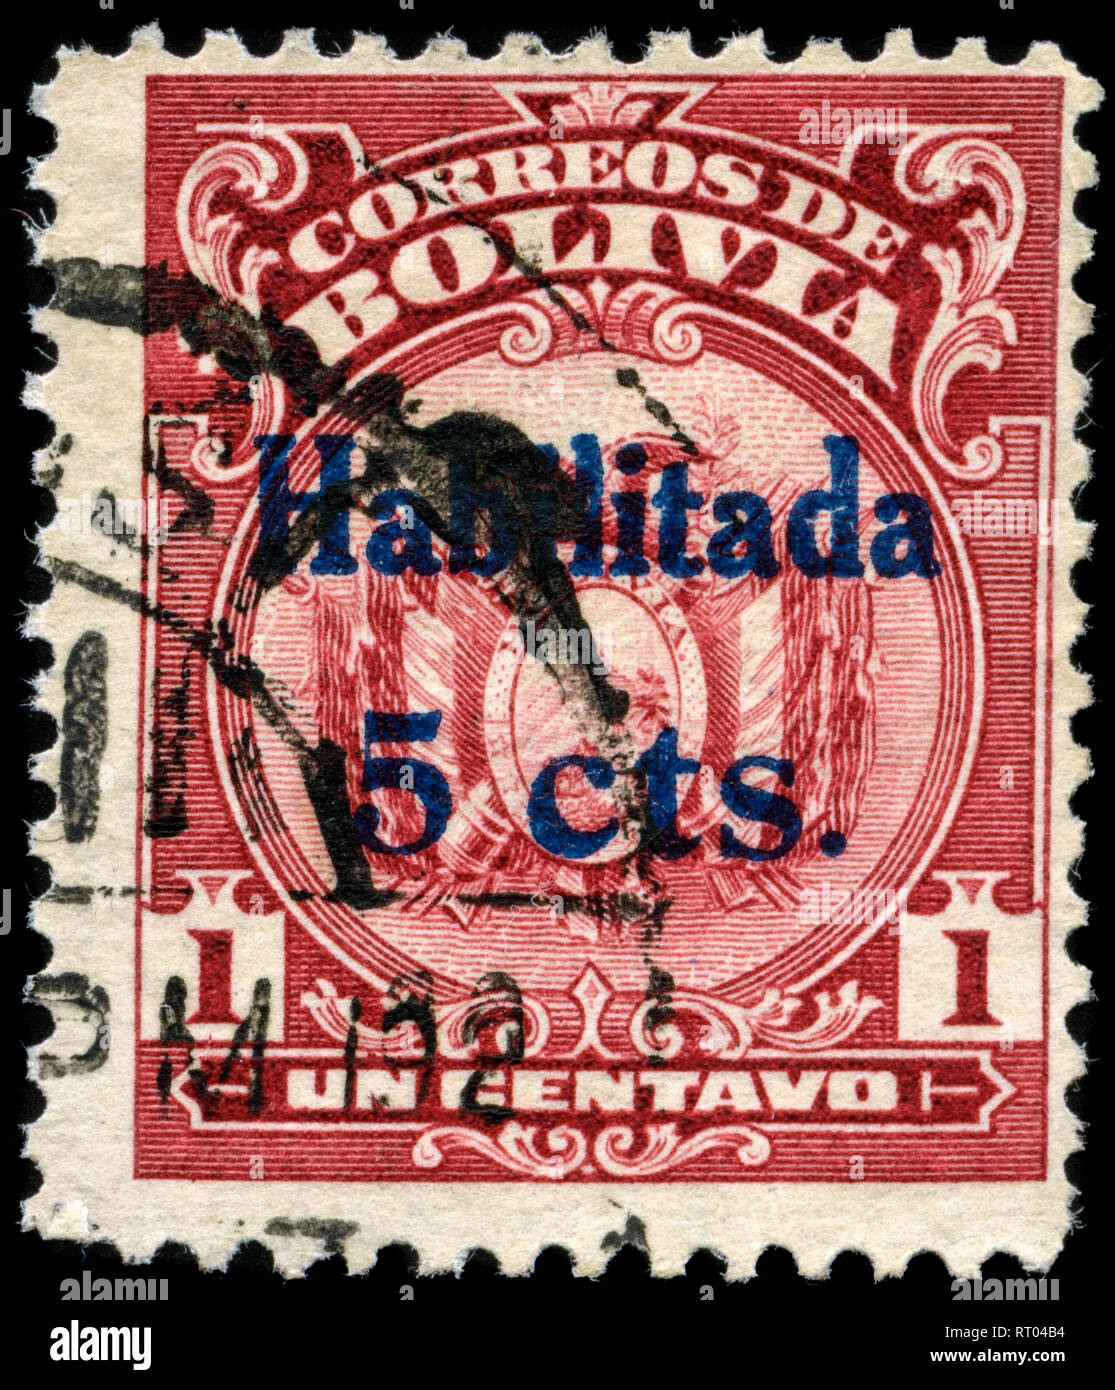 Postage stamp from Bolivia in the Definitive series issued in 1923 Stock Photo